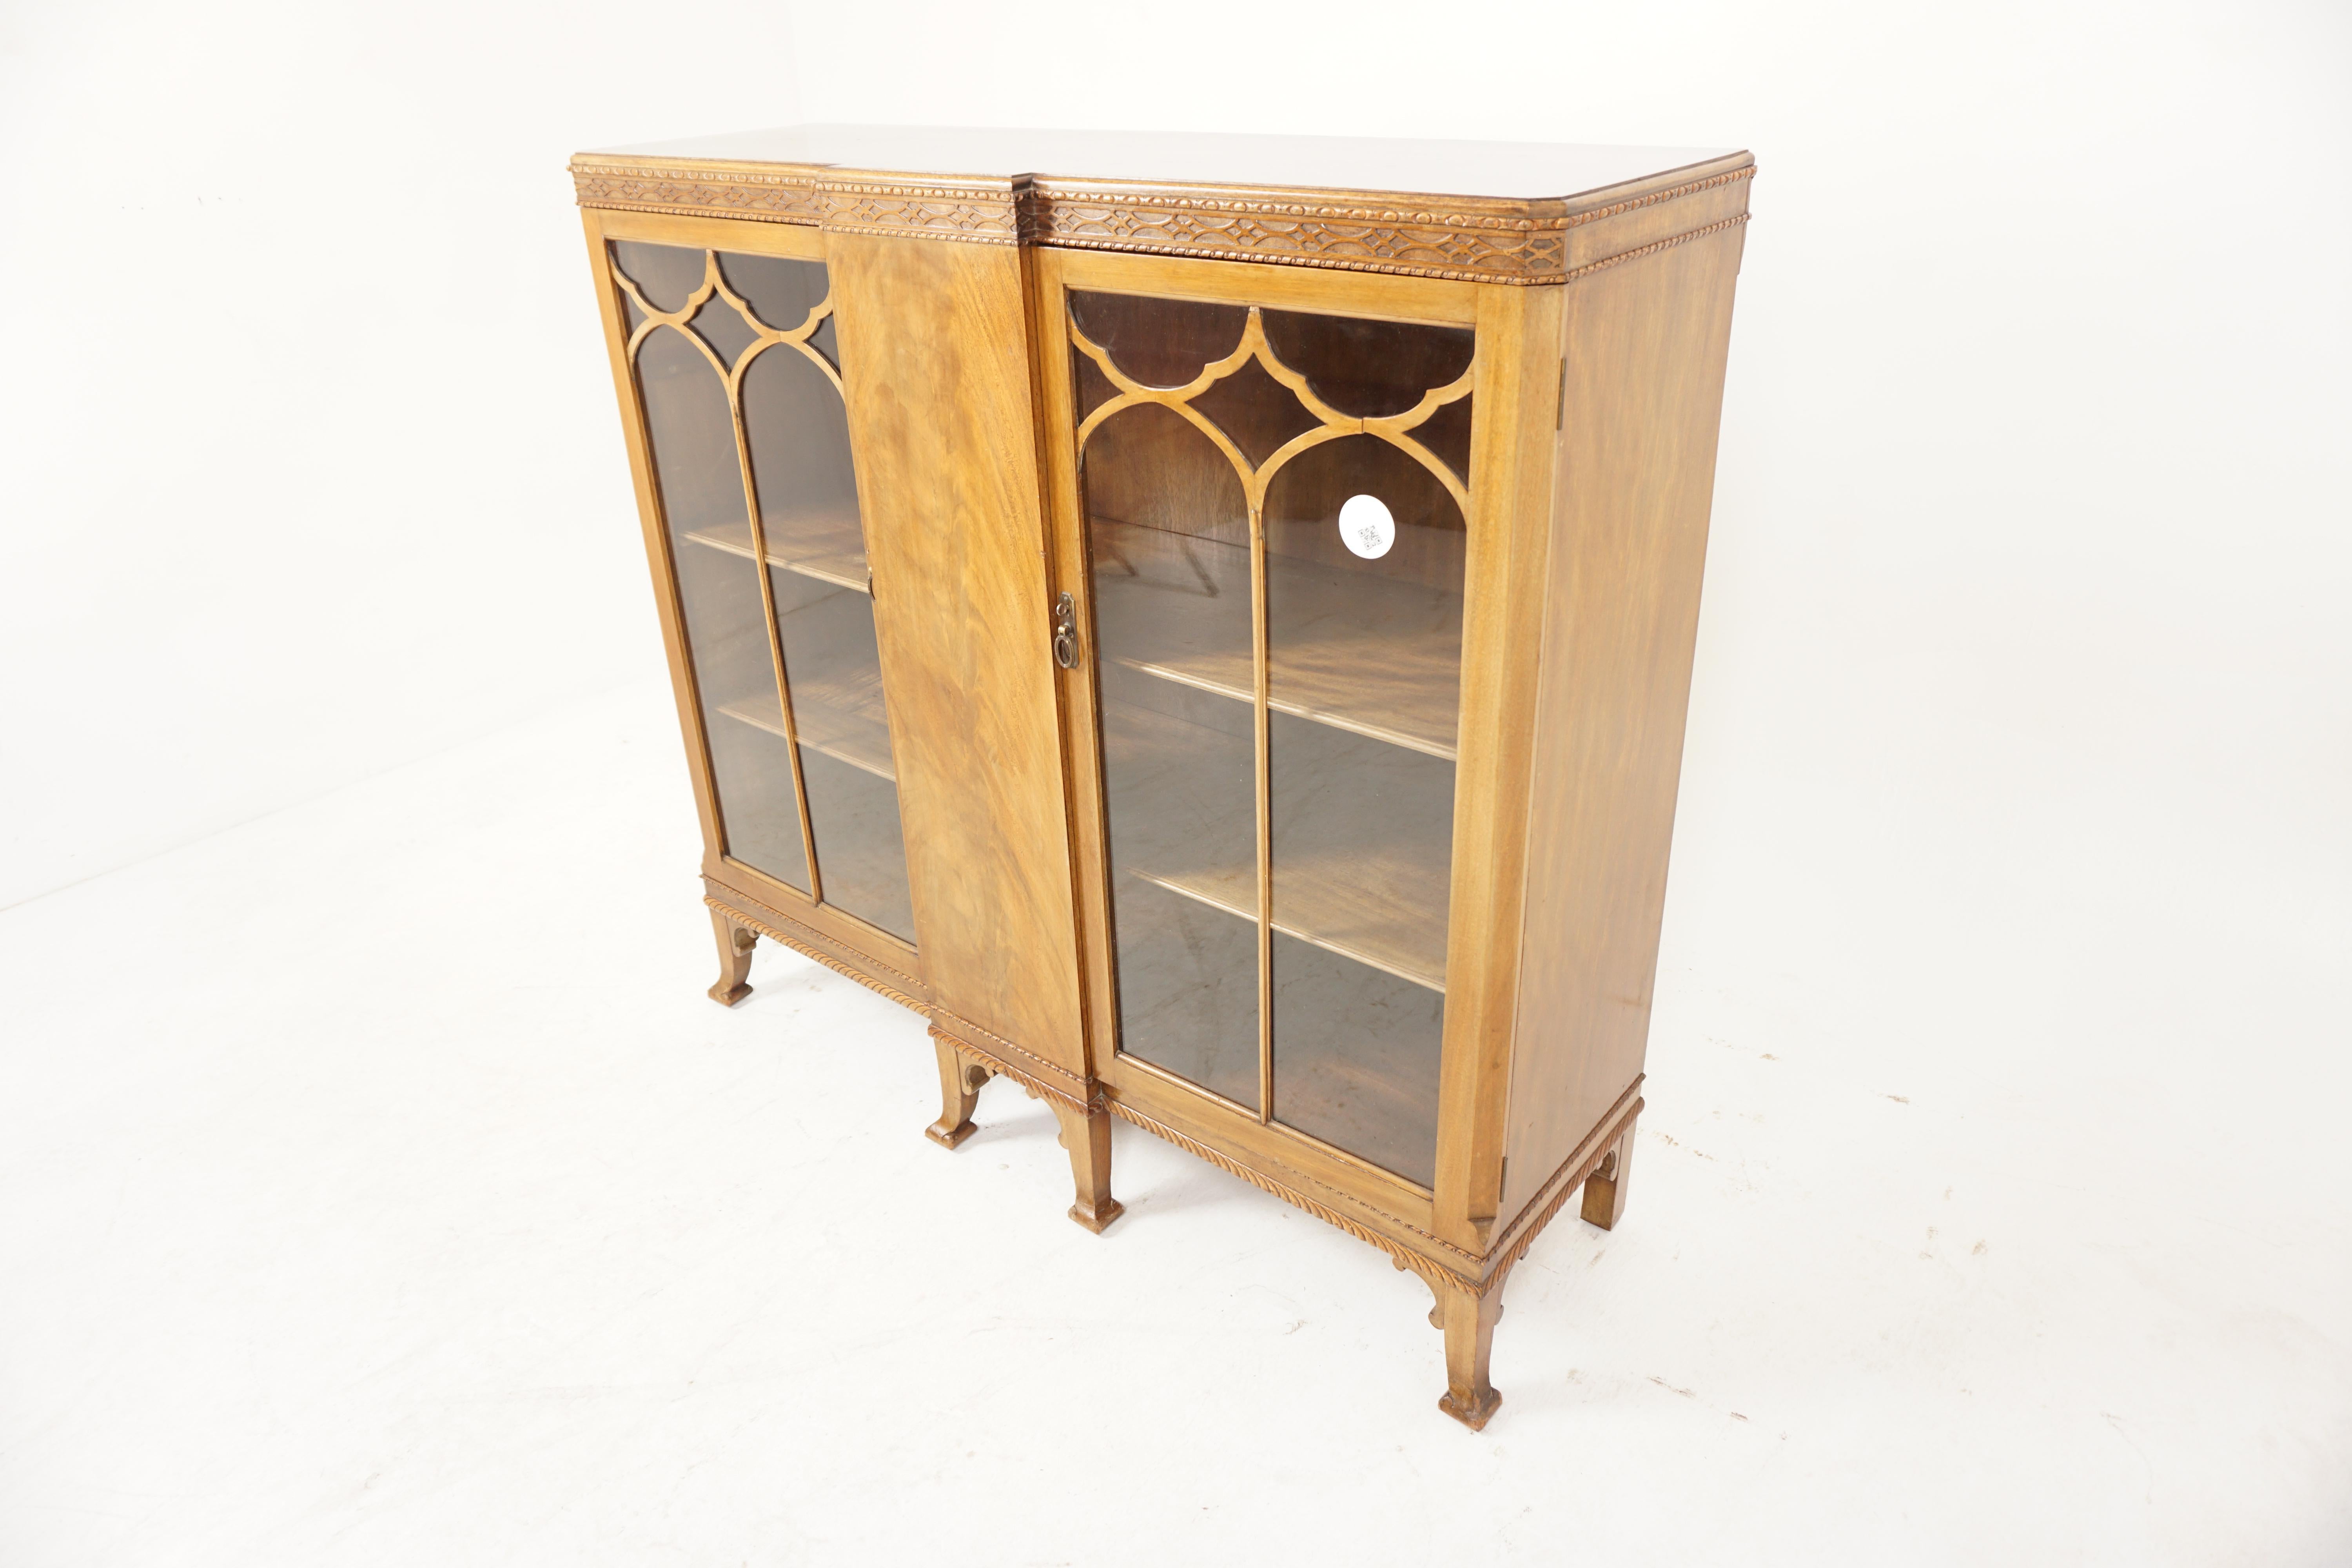 Vintage Two Door Walnut China Cabinet, Display Cabinet/Bookcase, Scotland 1930, H1004

Scotland 1930
Solid Walnut
Original Finish
Rectangular breakfront top
Carved frieze below
Central solid walnut door flanked by a pair of original glass